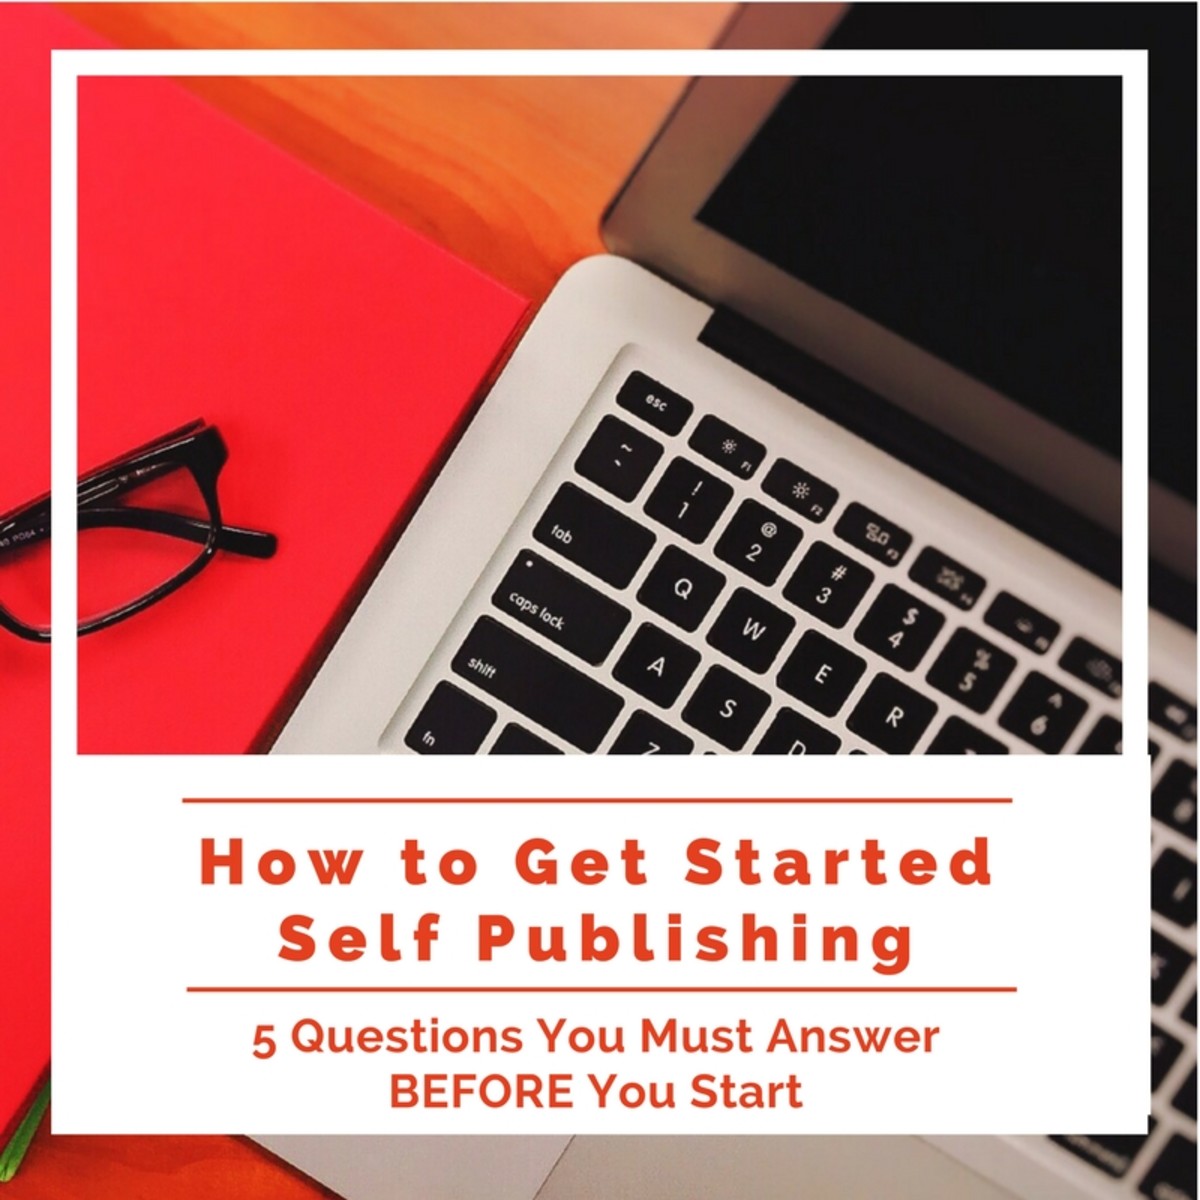 Ways to Get Started Publishing